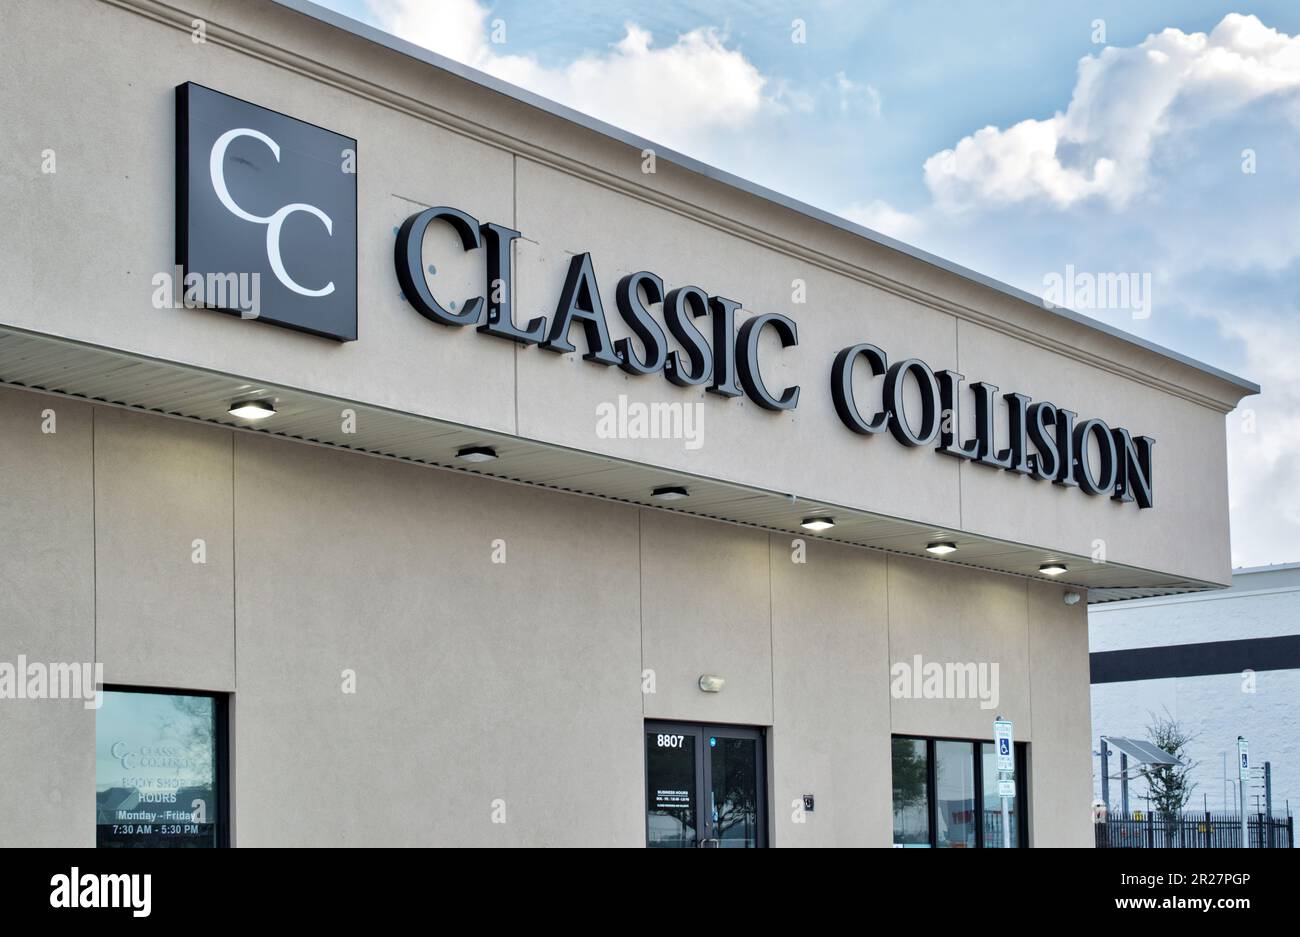 Humble, Texas USA 02-26-2023: Classic Collision business exterior storefront in Humble, TX. Vehicle repair company established in 1983. Stock Photo